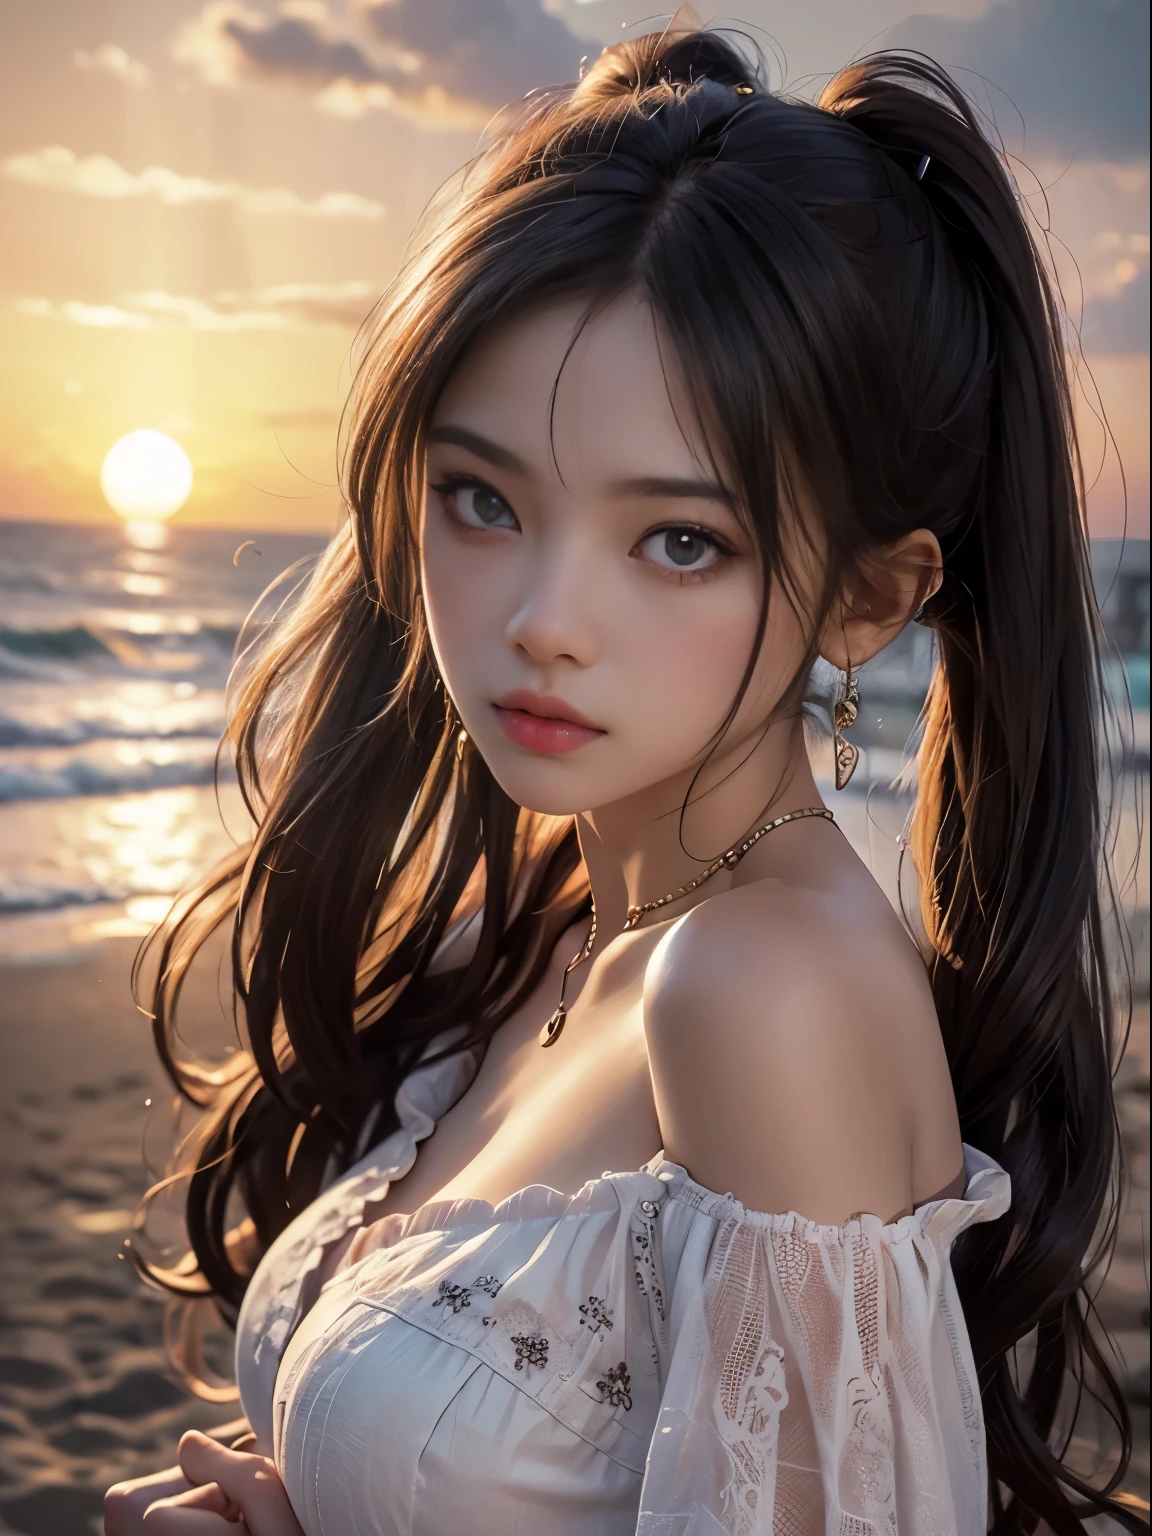 masterpiece、((1 girl))、(twin tails,Brunette hair:1.2)、(Amazing detailed face and eyes,pink eyes,clear eyes)、((amazingly beautiful girl))、Shiny brunette hair、Tunic,off shoulder、((highest quality)), (Super detailed), (Very detailed 8k photo:1.5)、(very detailed,High resolution raw color photos,professional photography,(((bokeh))),Depth of the bounds written)、beach,white sand beach、(((twilight,sunset,magic hour)))、(Shrug your shoulders,Look at the viewer with a dazed expression)、